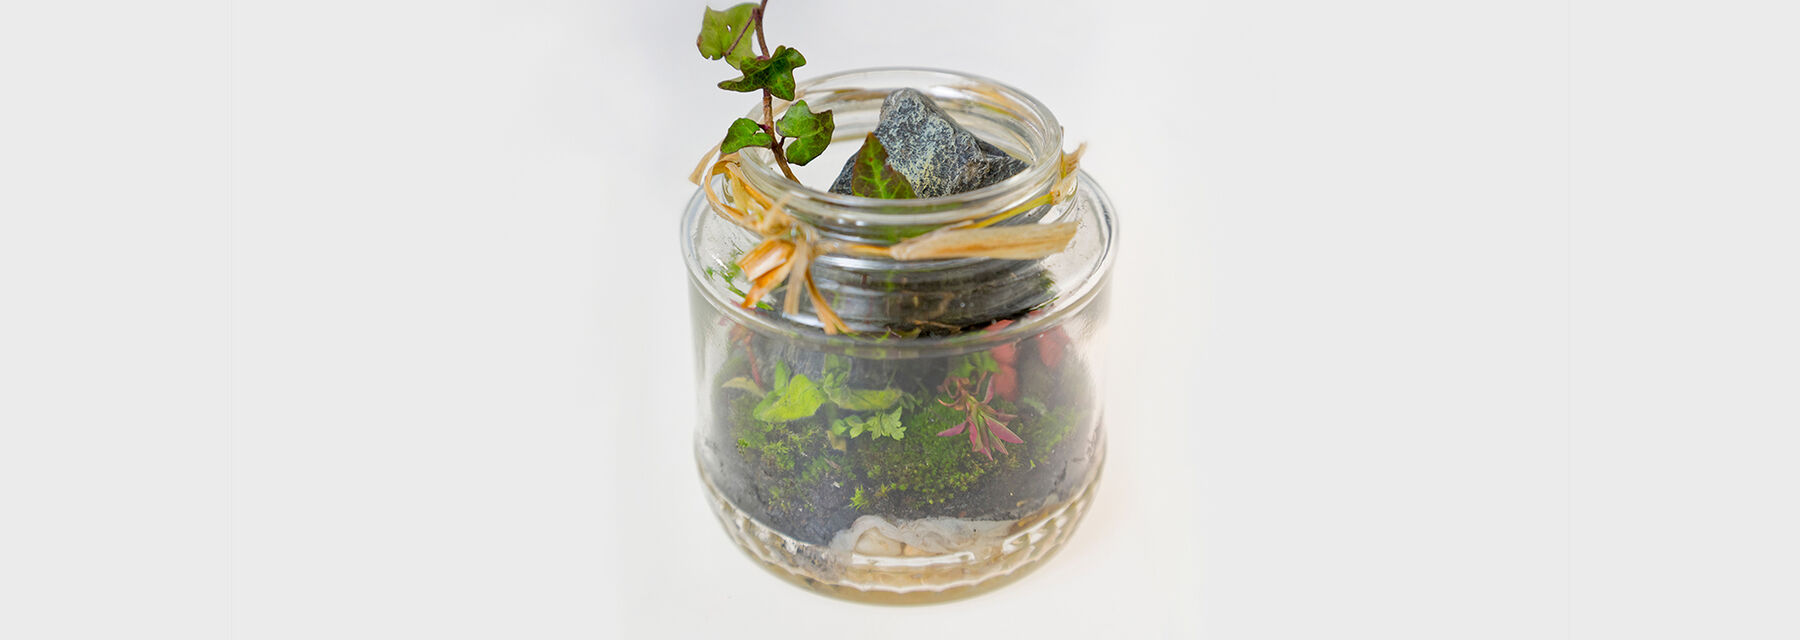 A jam jar filled with stones, moss and a piece of ivy.